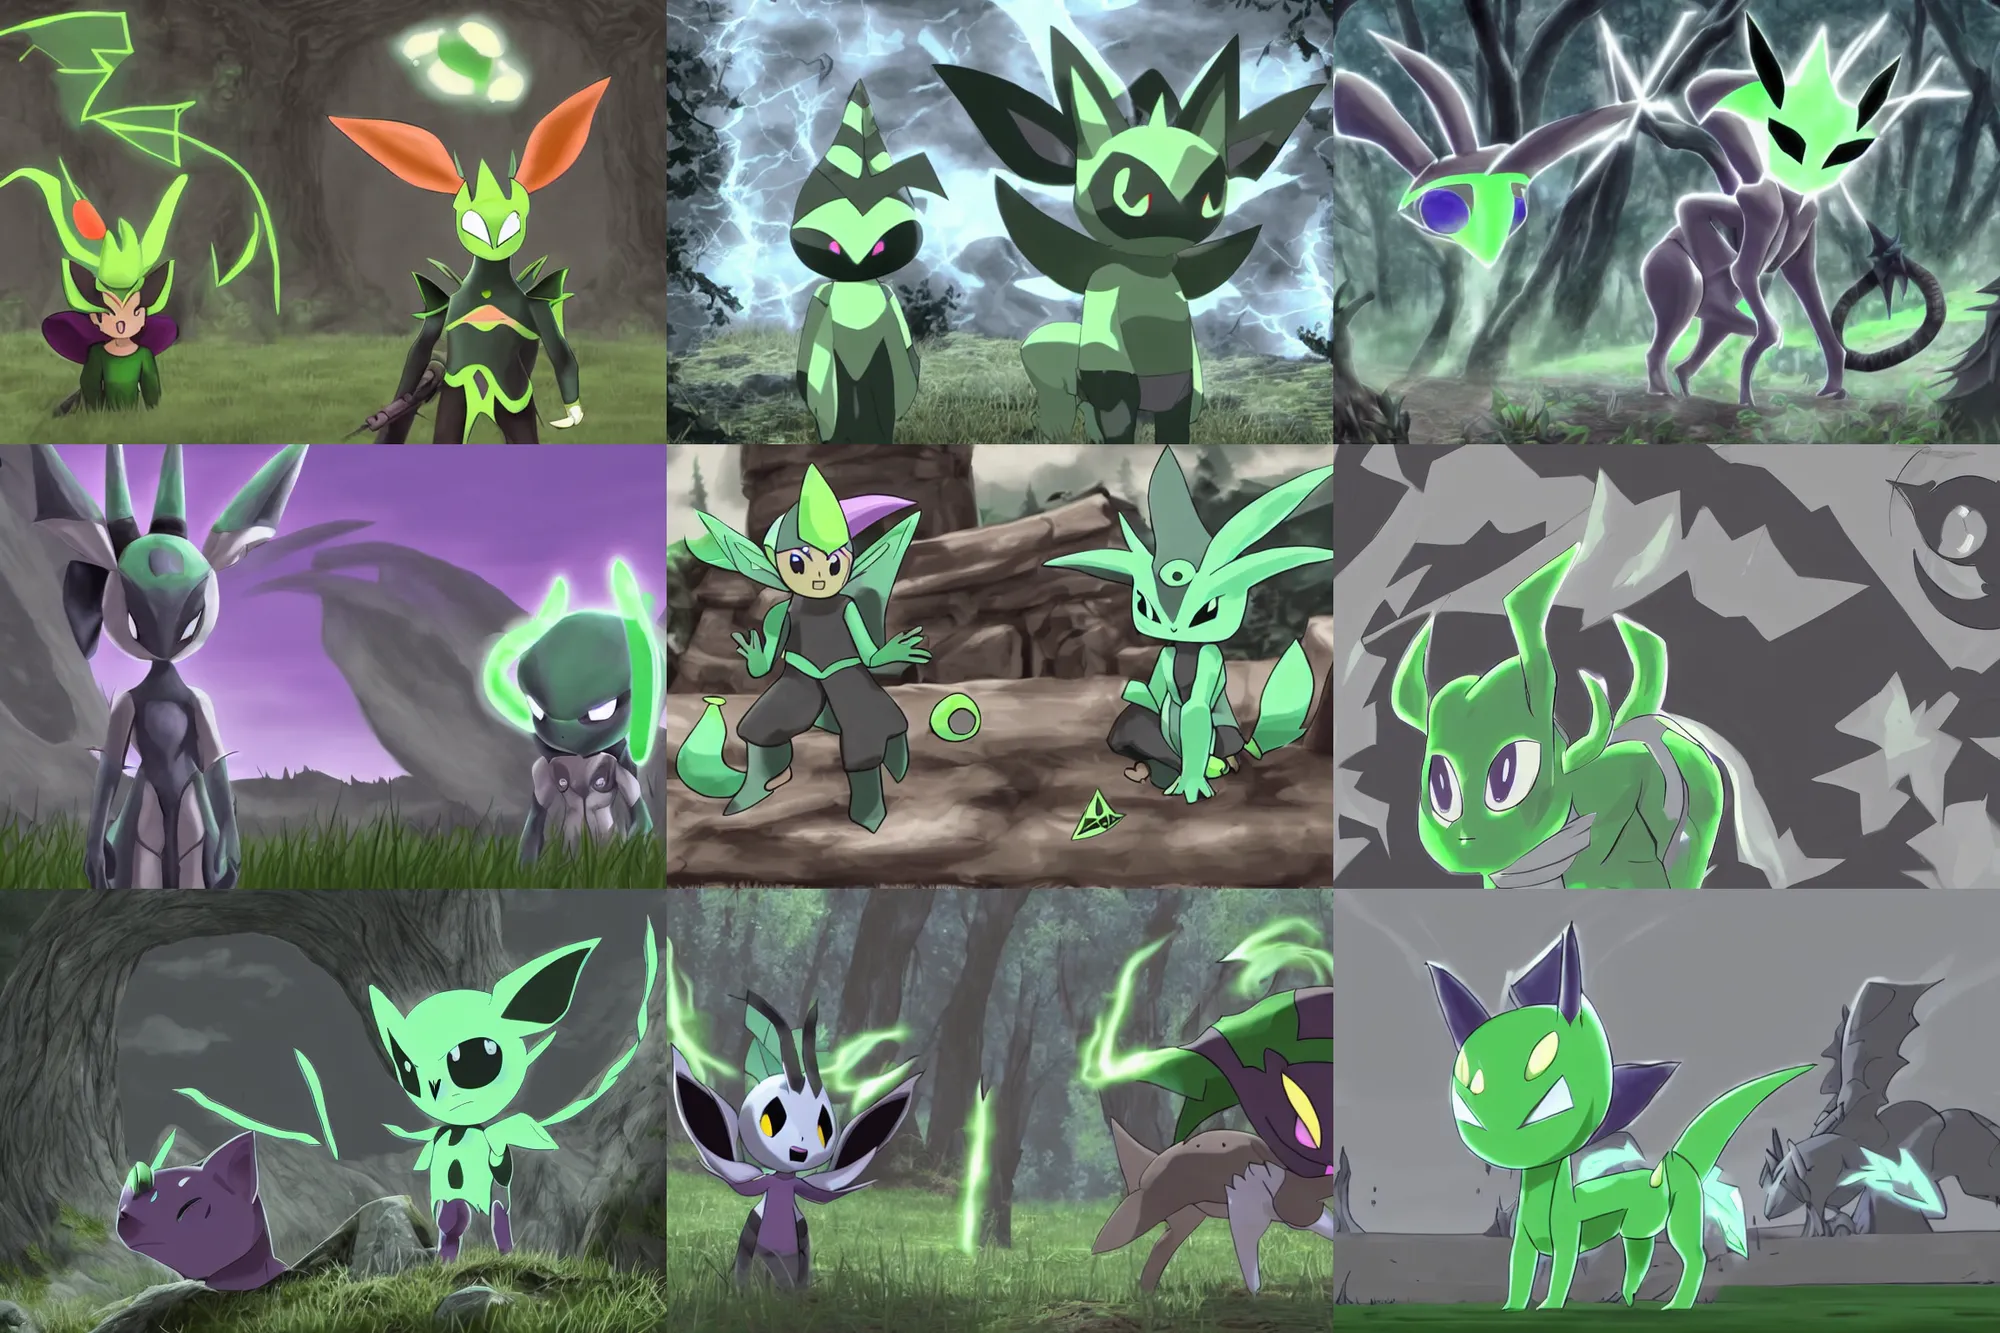 Prompt: trailcam footage grayscale low saturation video game elden clay celebi : espeons reprisal star valley resident evil unreal engine mismagius oblivion mystery dungeon ultrahd resident eevee wearing bandanna fighting giratina in a stadium, the old god wearing a witch hat pokemon final cgsociety